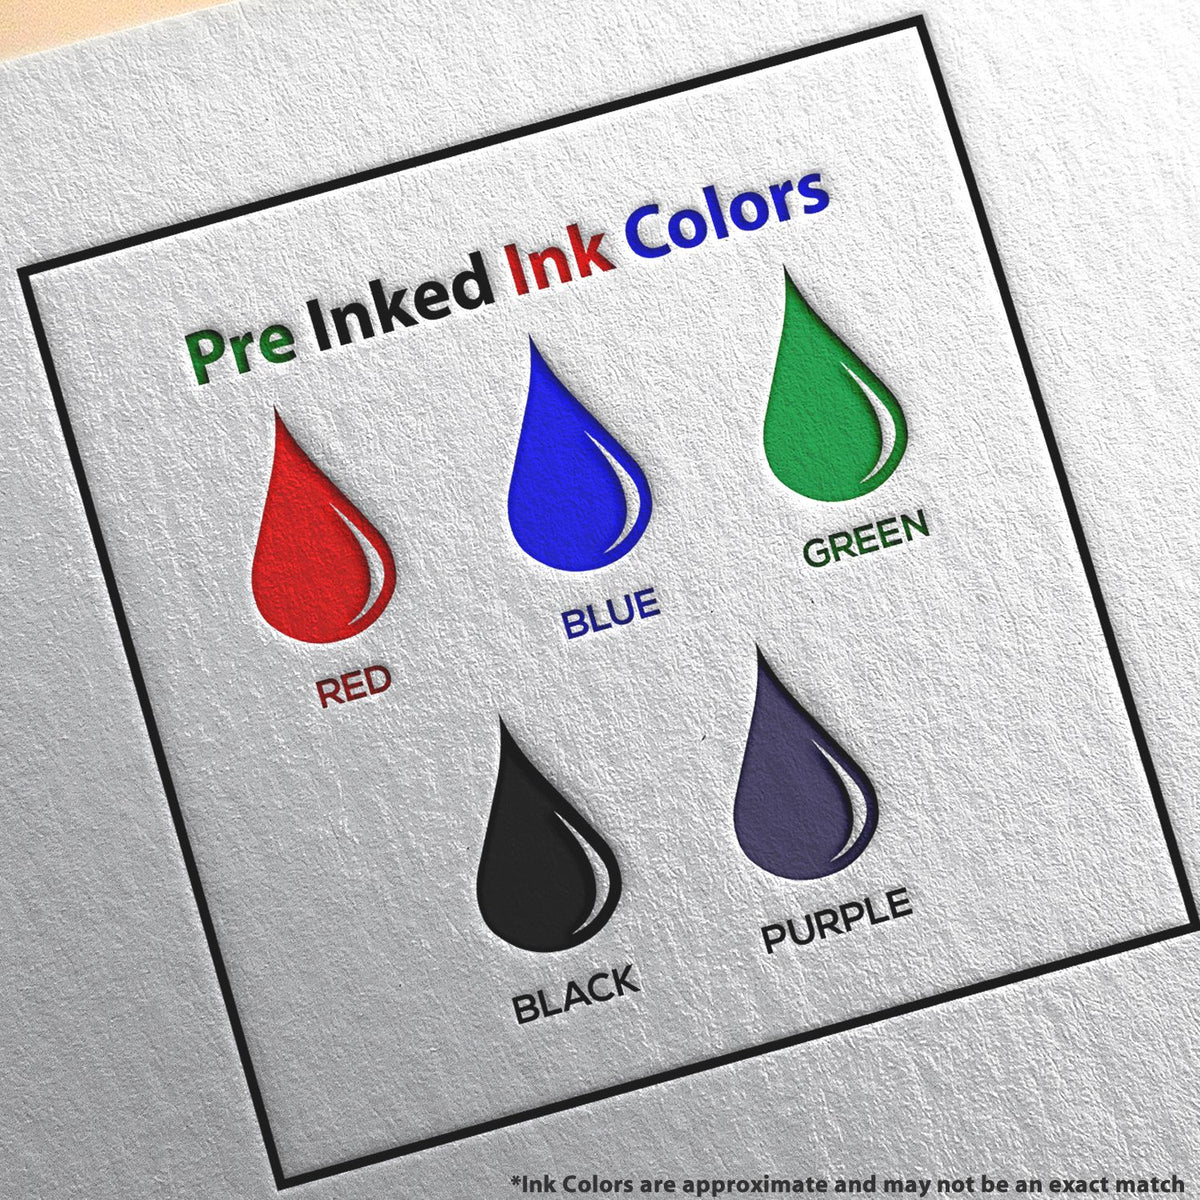 A picture showing the different ink colors or hues available for the Slim Pre-Inked Louisiana Land Surveyor Seal Stamp product.